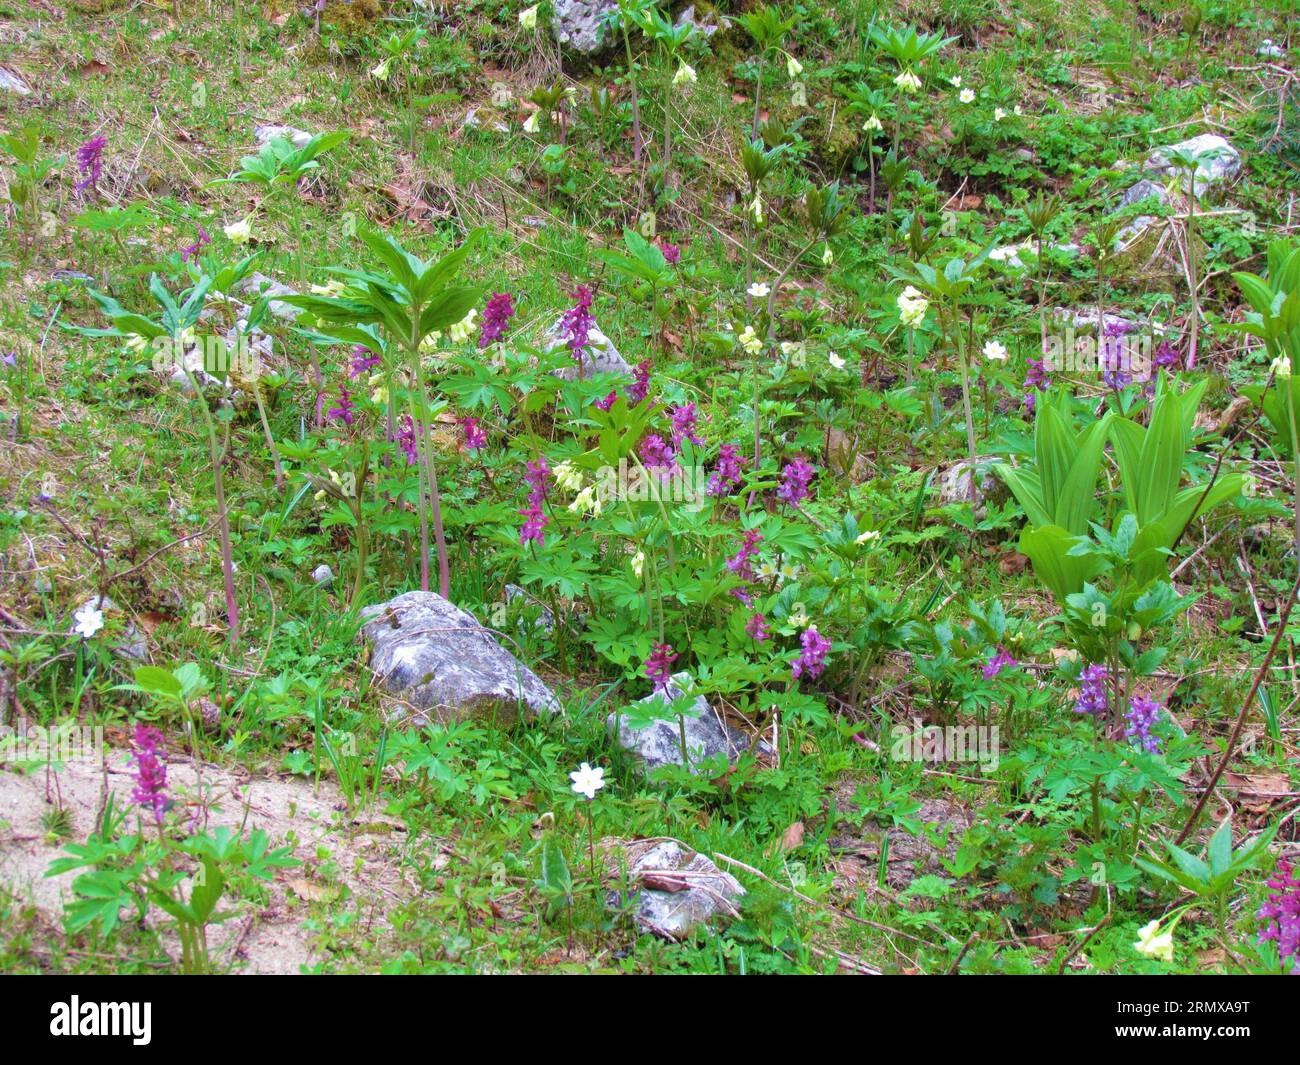 Spring garden of fumewort (Corydalis solida) and drooping bittercress (Cardamine enneaphyllos) with rocks covering the ground Stock Photo